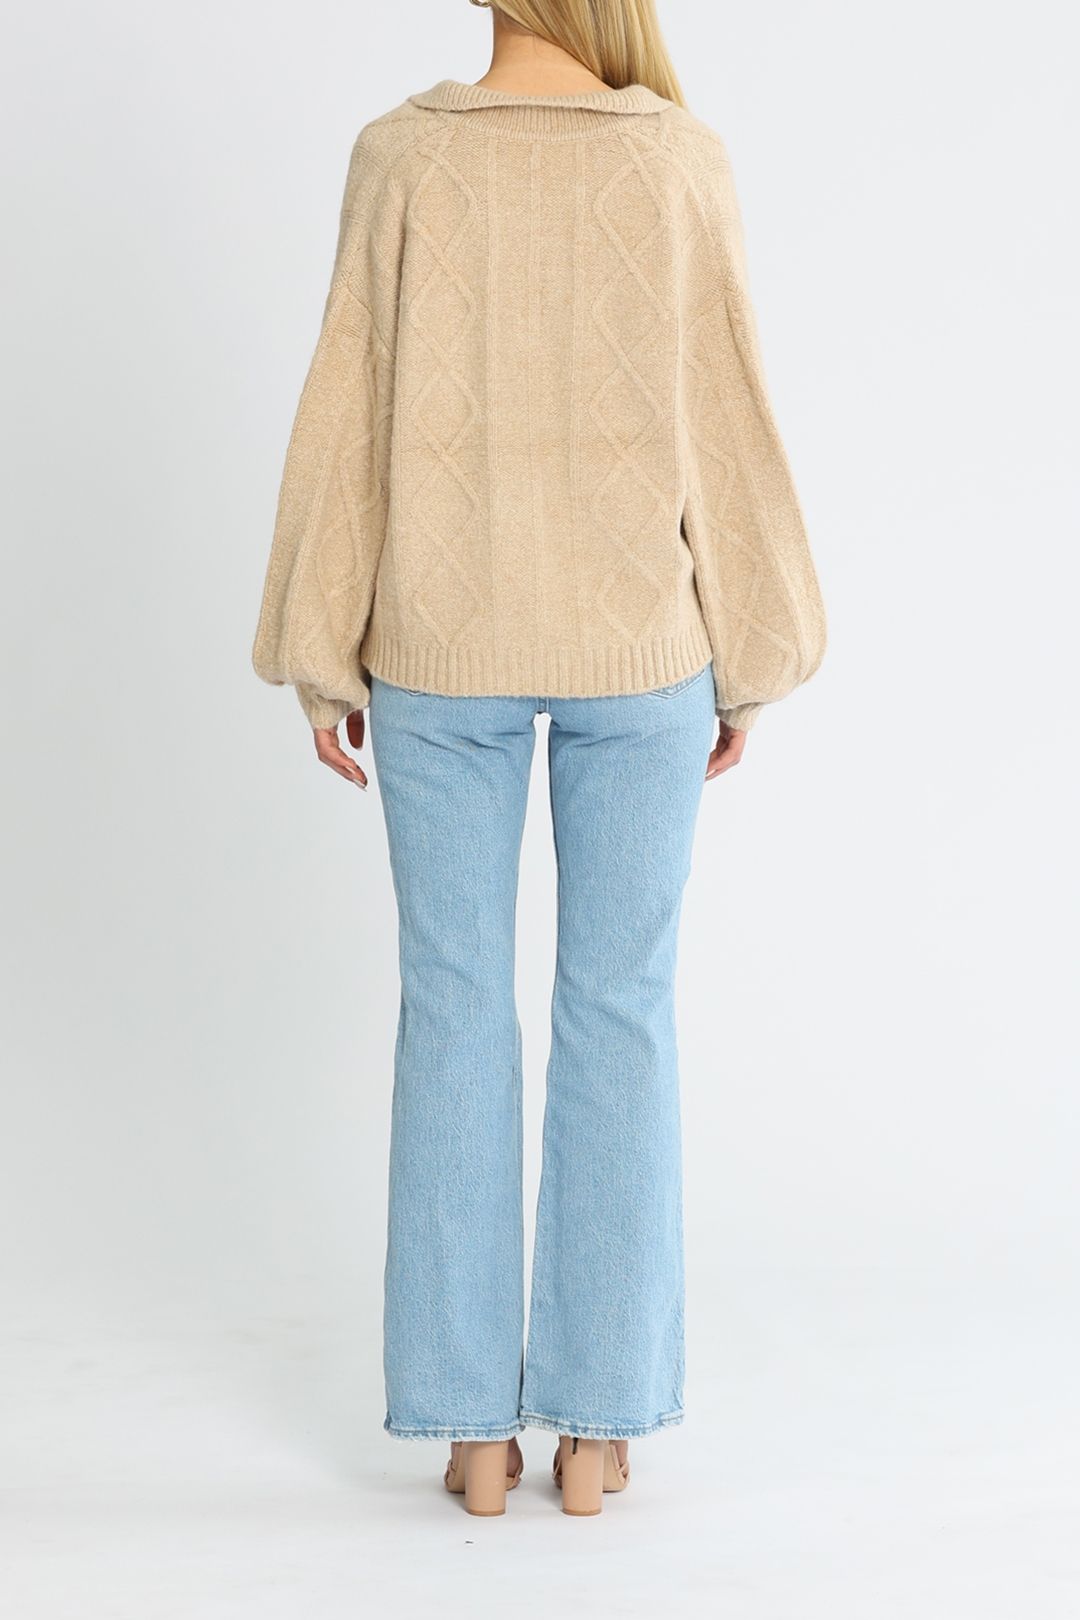 Staple The Label Norma Collared Jumper